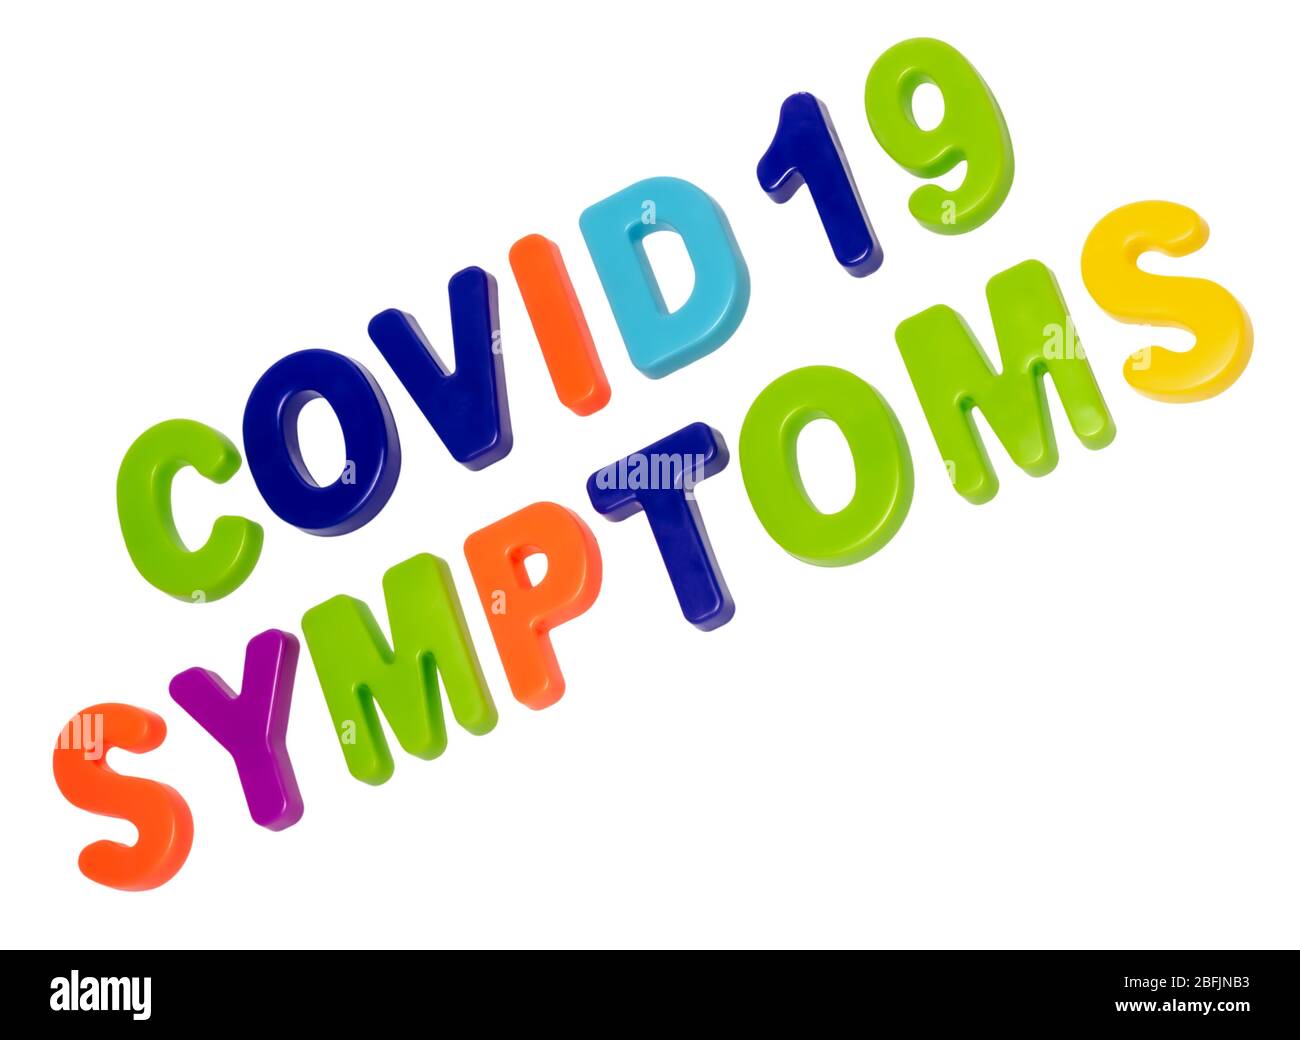 Coronavirus pandemic, text COVID-19 SYMPTOMS on a white background. Symptoms of a global pandemic disease. COVID-19 is the official new name for coron Stock Photo